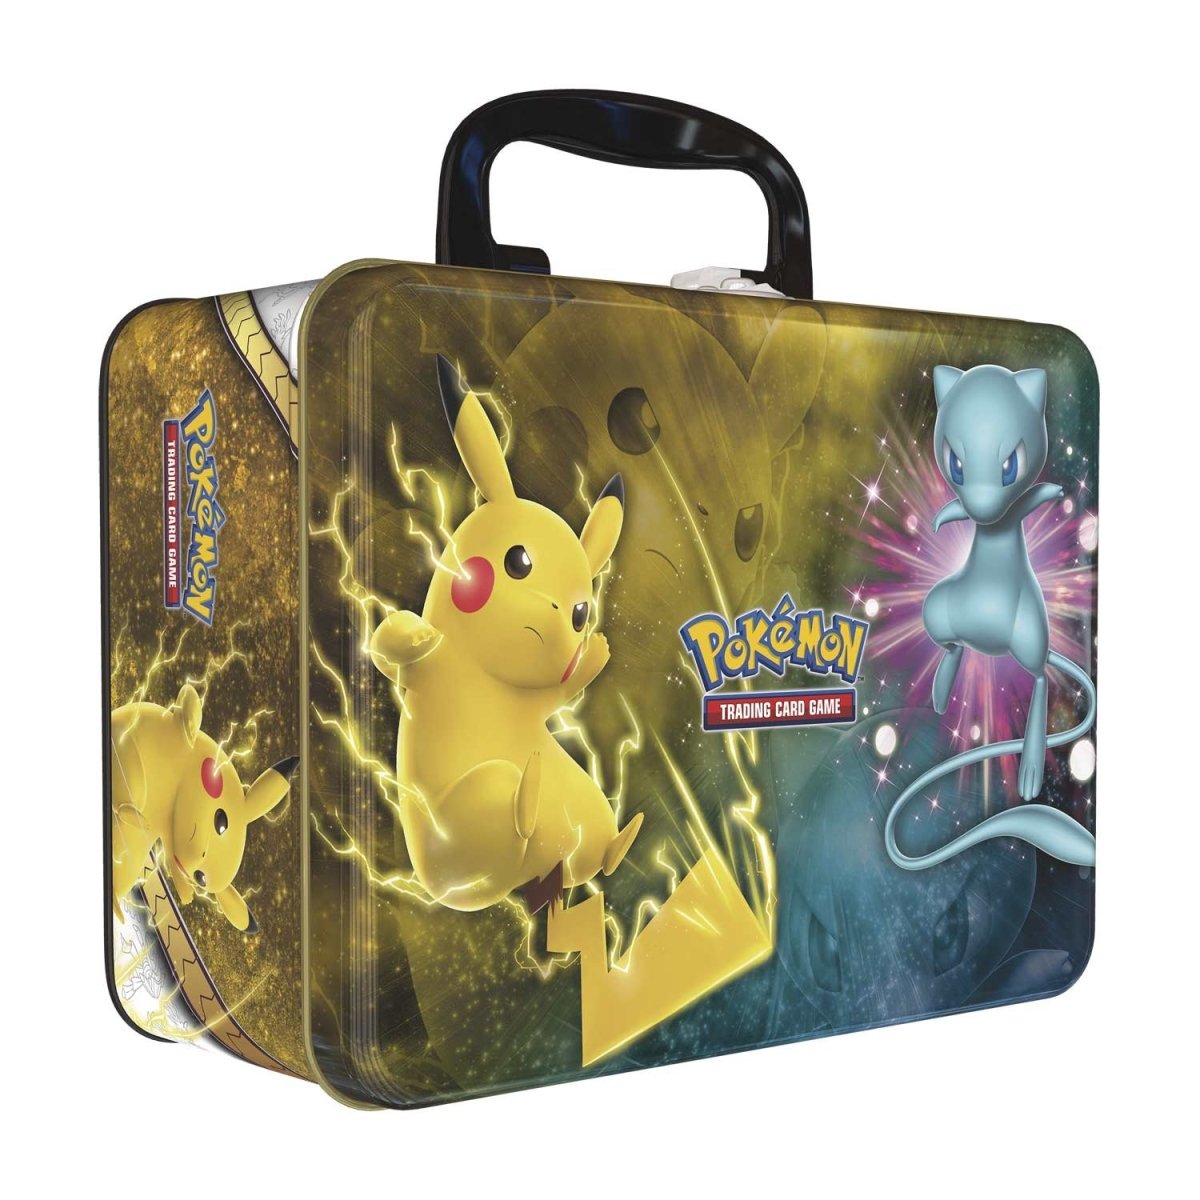 A Peek At The Pokémon Goodies From The Official Pokémon Online